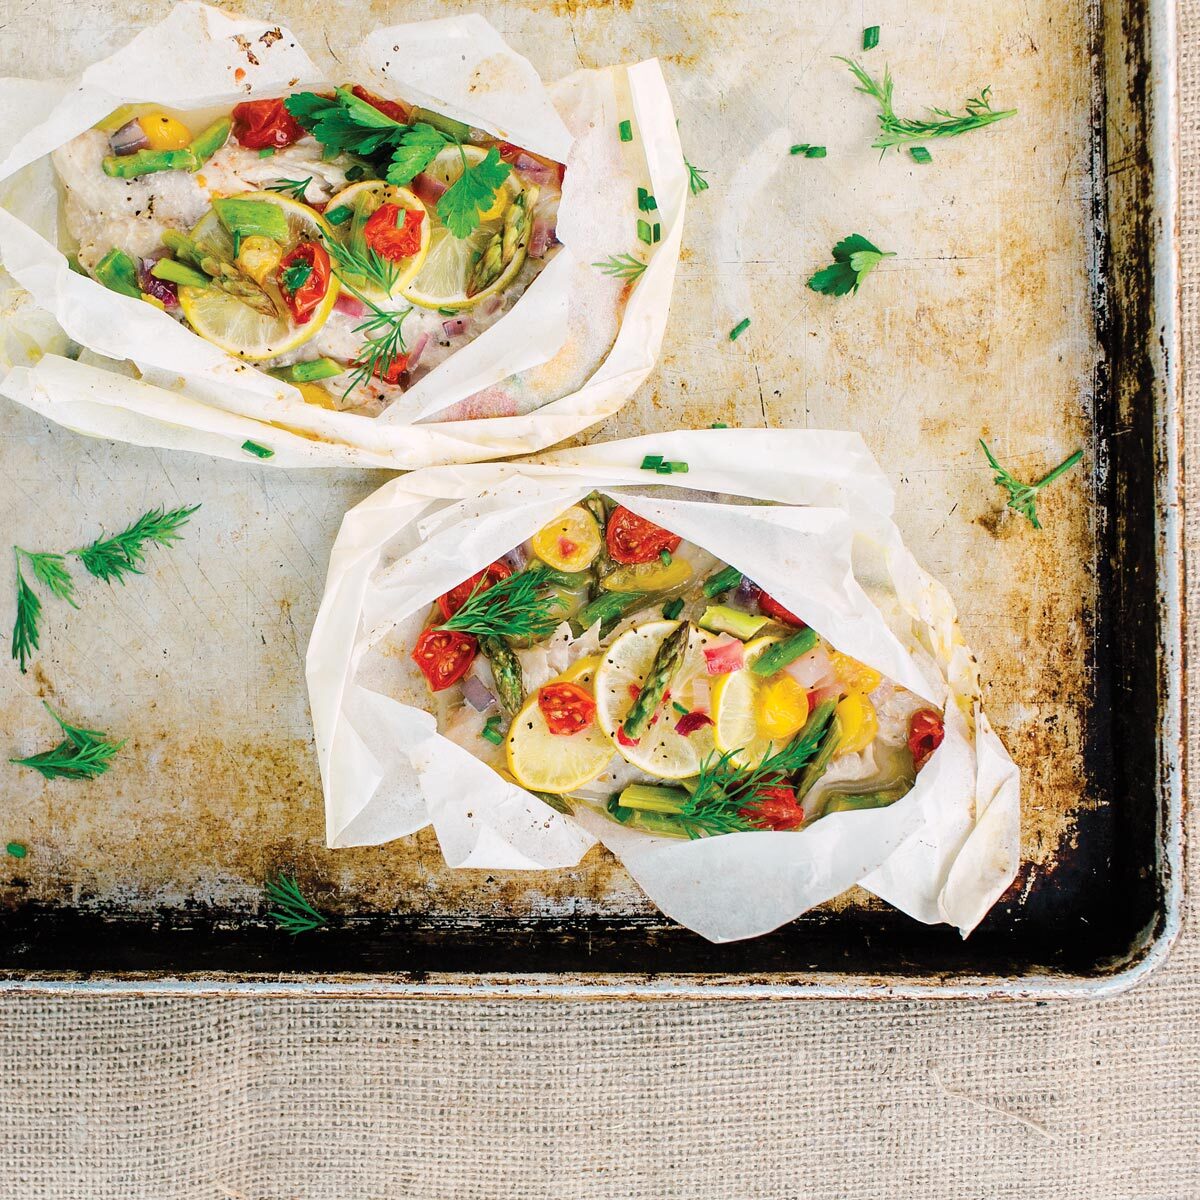 Fish in Parchment With Asparagus, Tomatoes, and Herbs